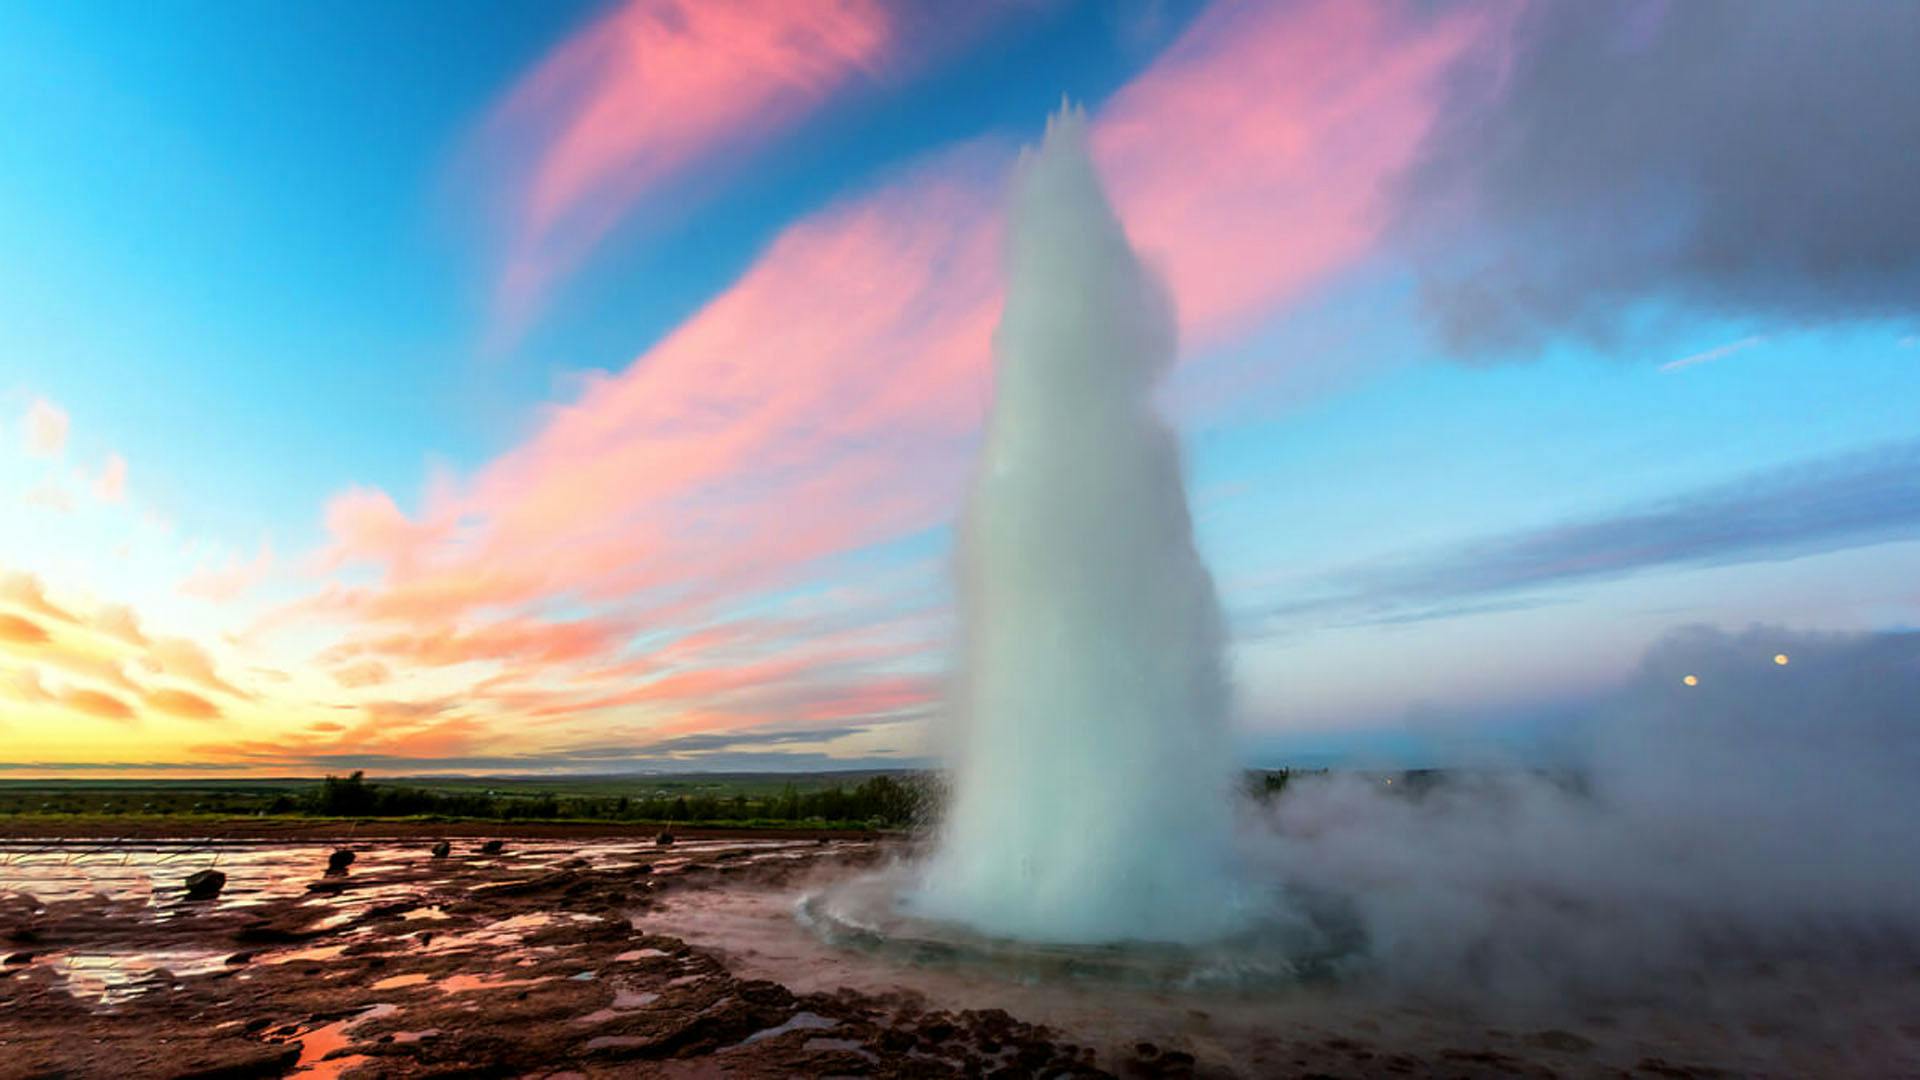 Geyser with magical sky in background